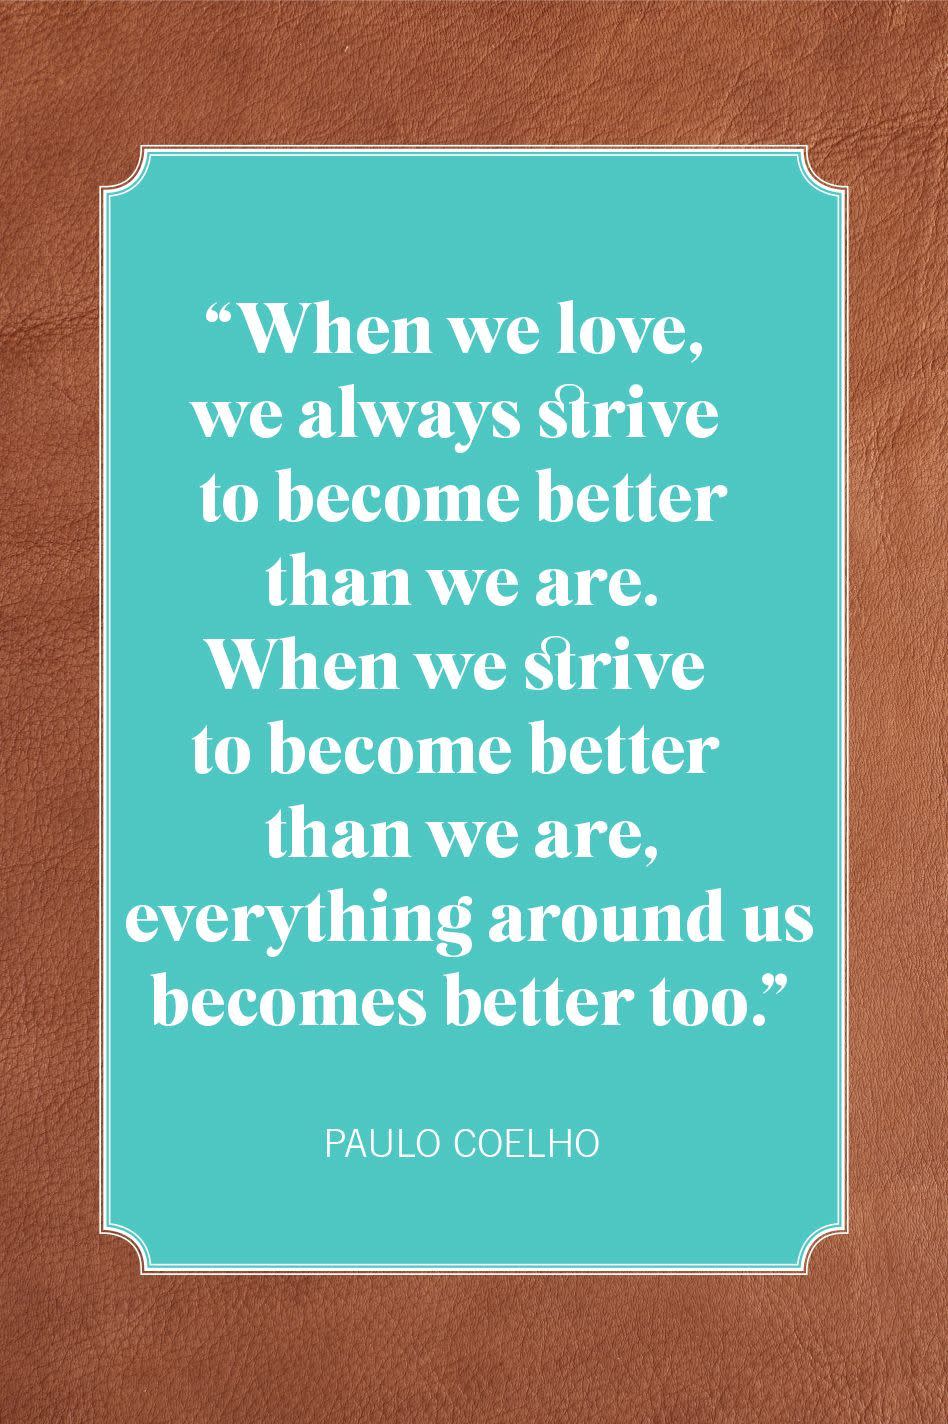 valentines day quotes for friends paulo coelho